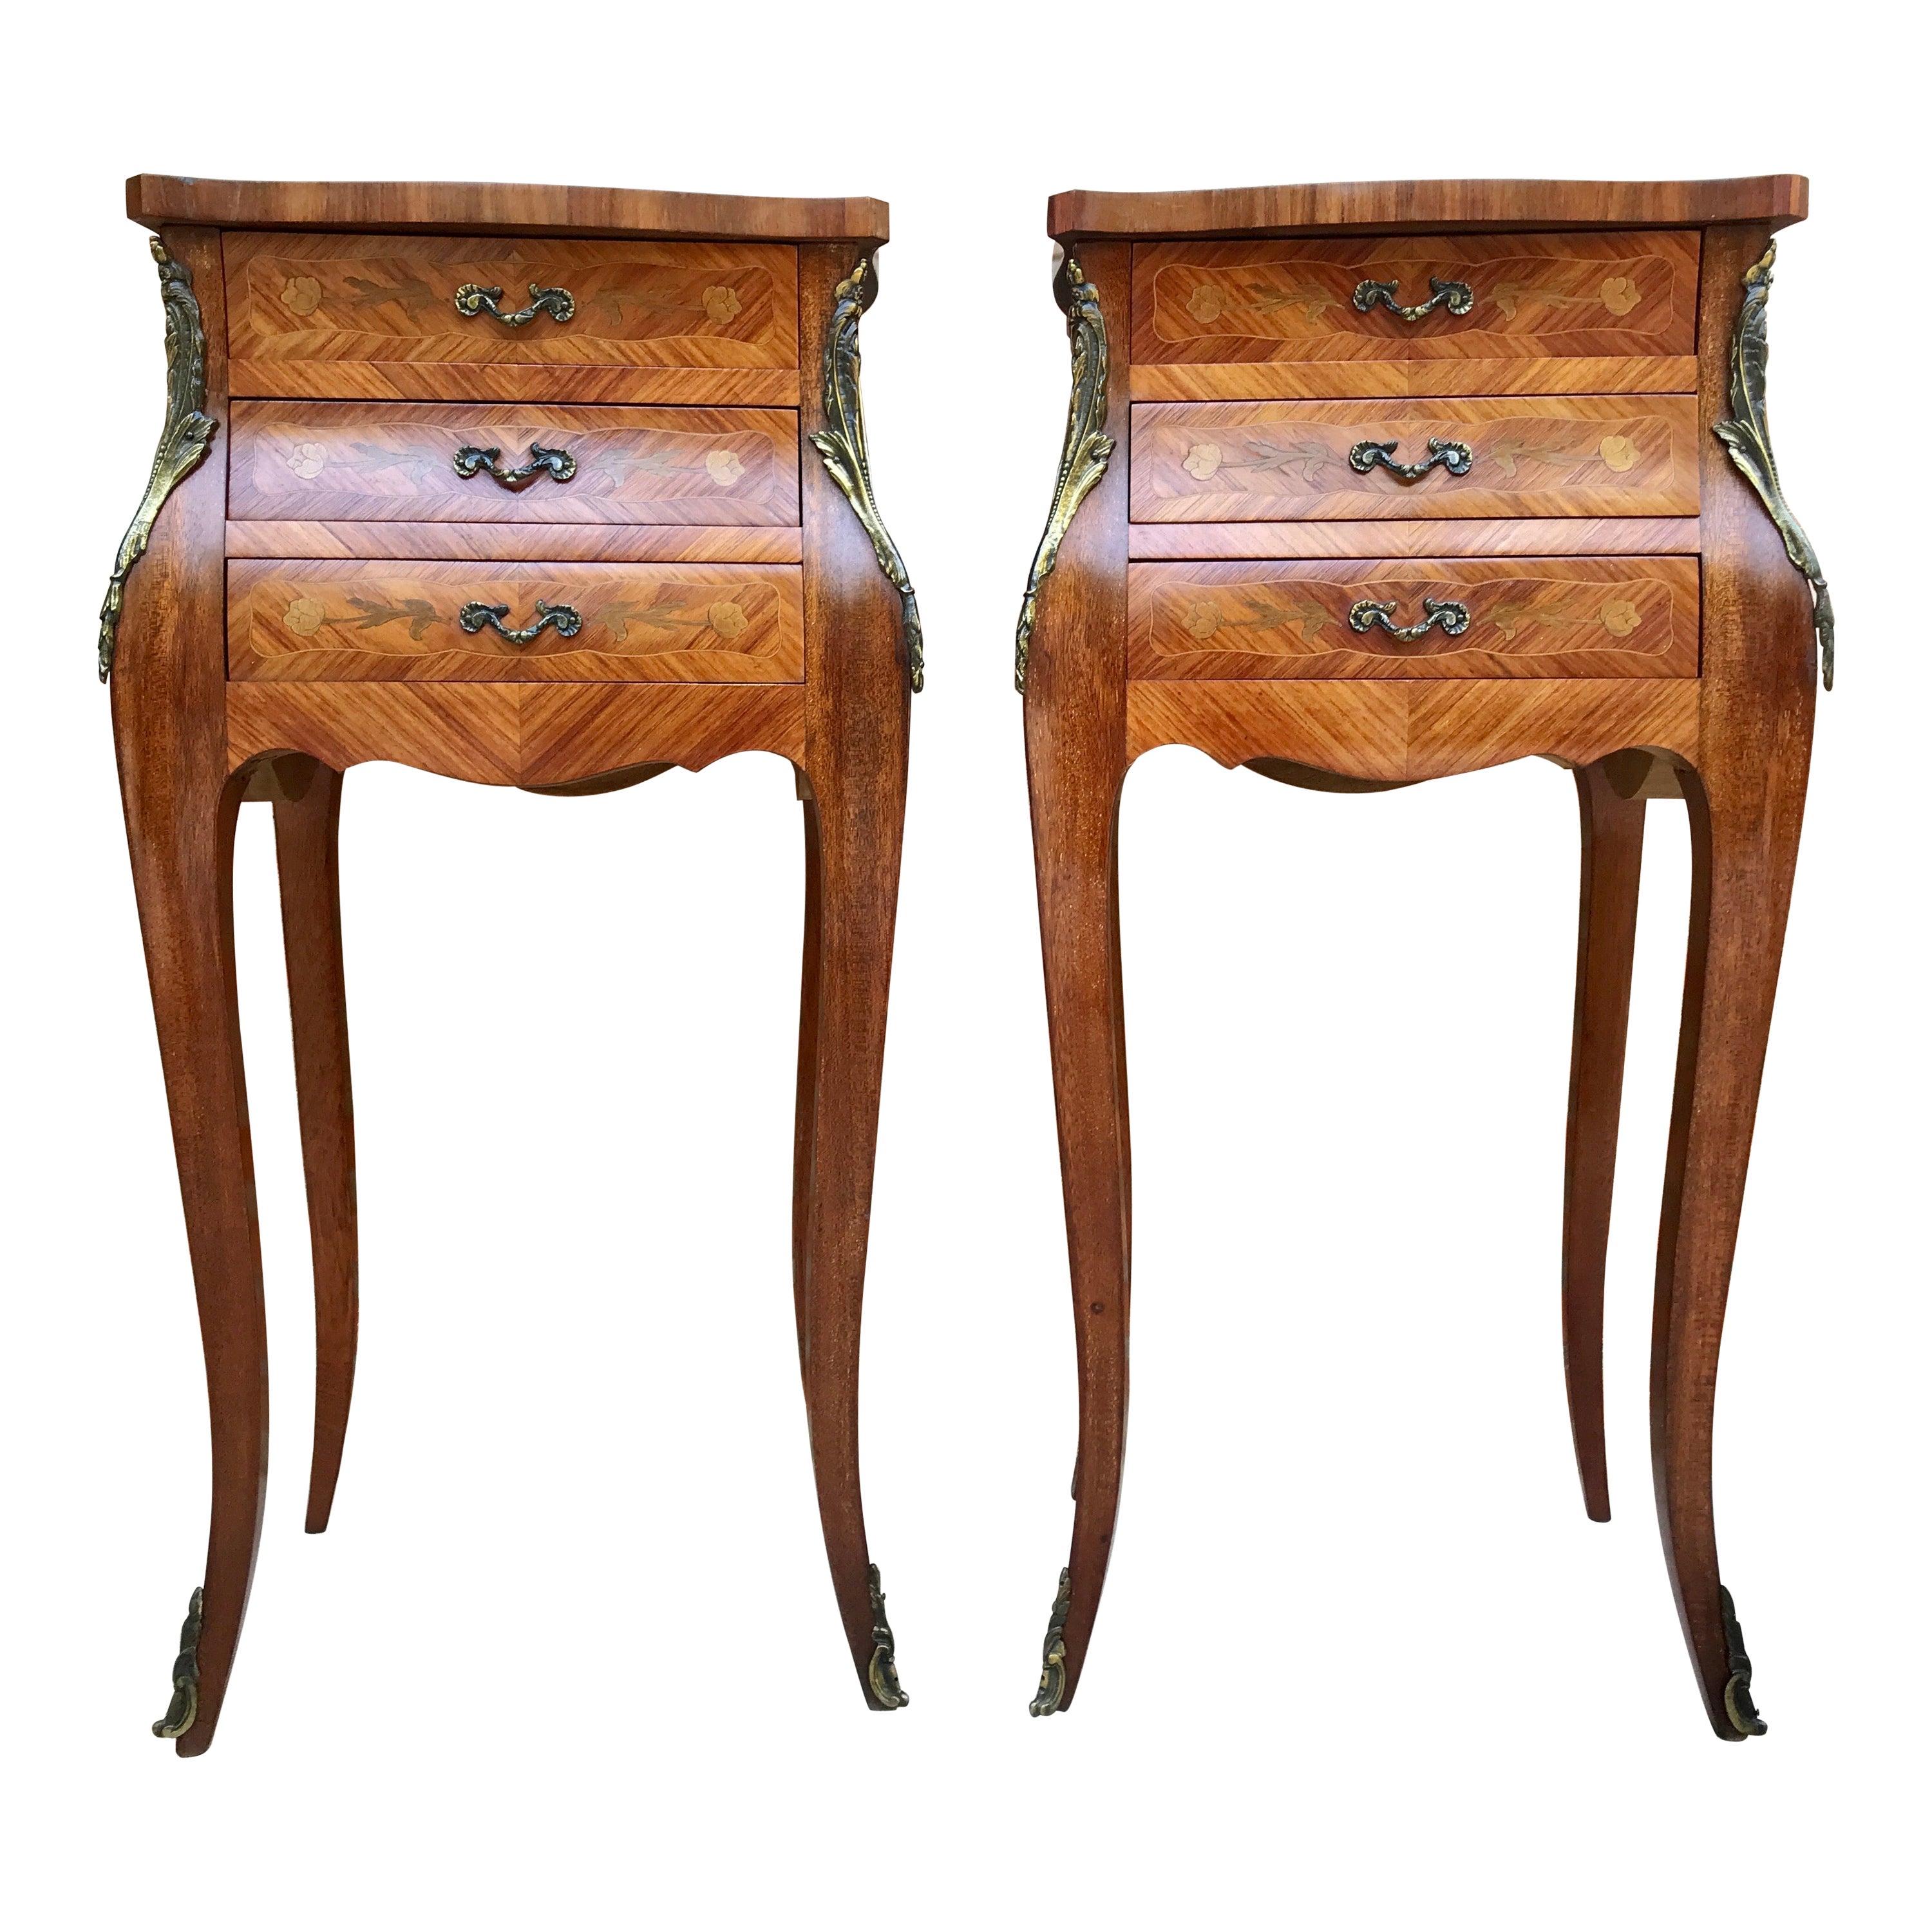 French Classic Louis Vx Style Marquetry Nightstands with Three Drawers, 1920s, S